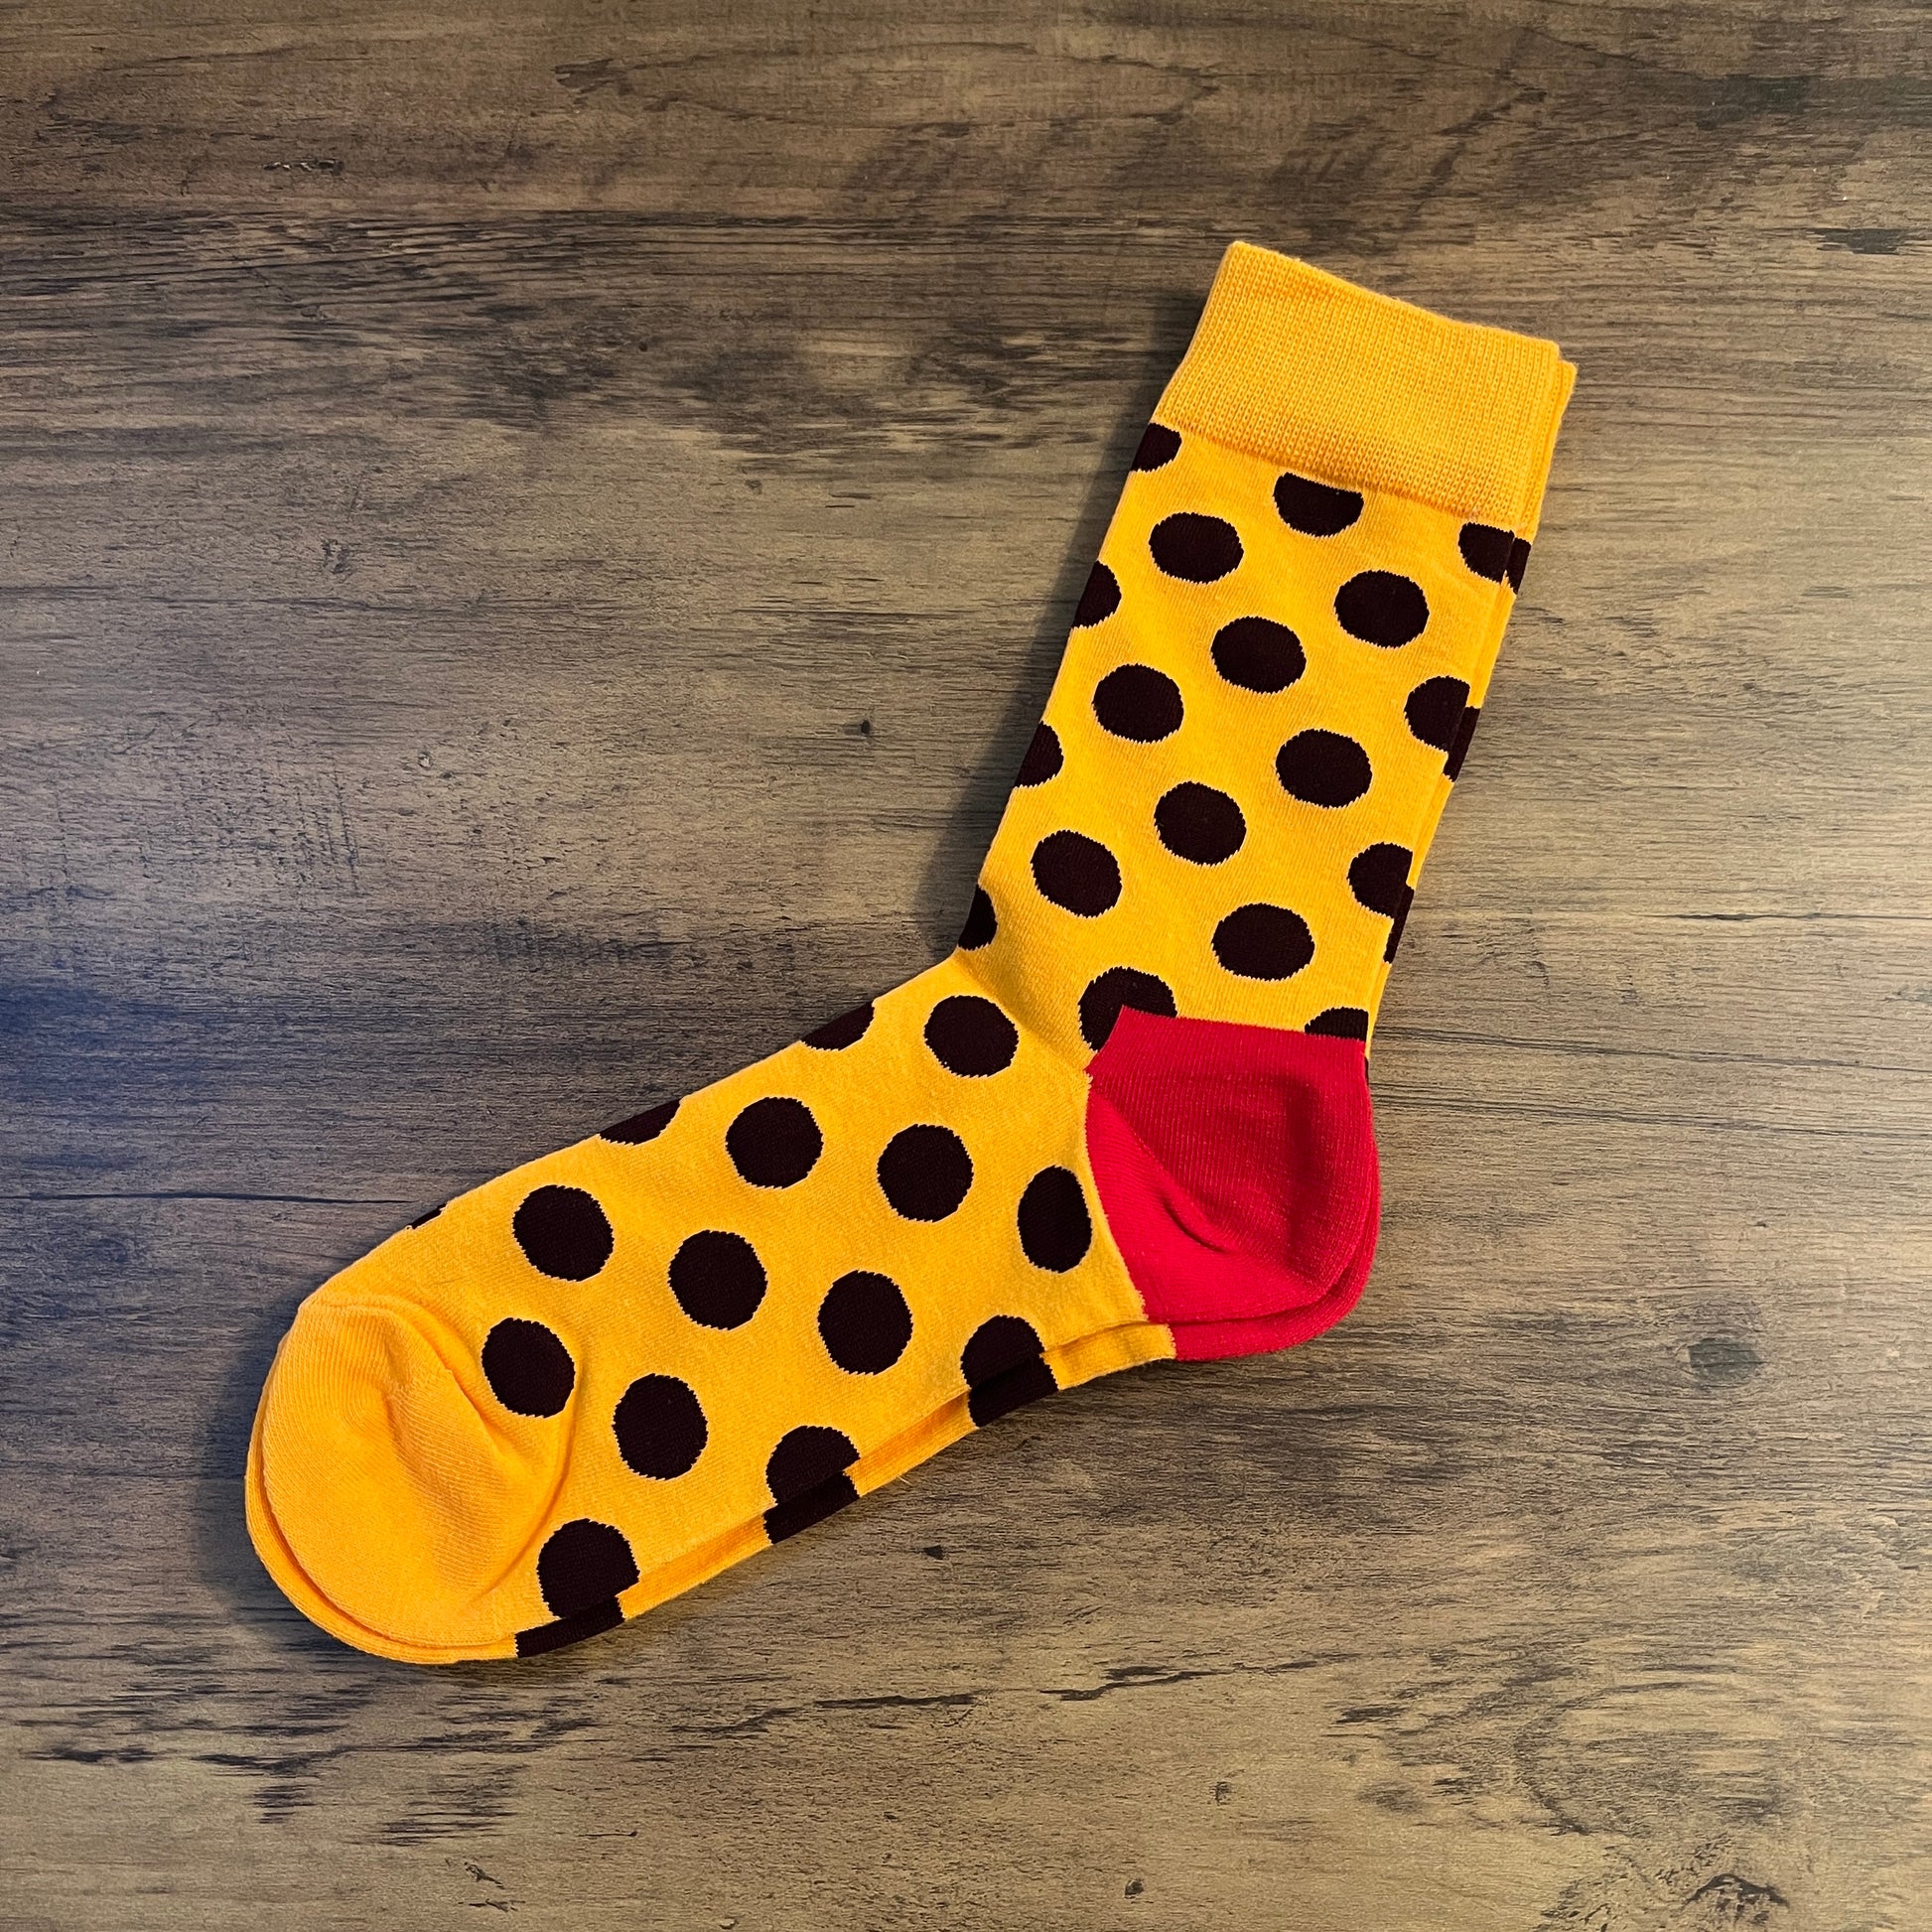 Tasker & Shaw | Luxury Menswear | Gold with black spots and red heal socks